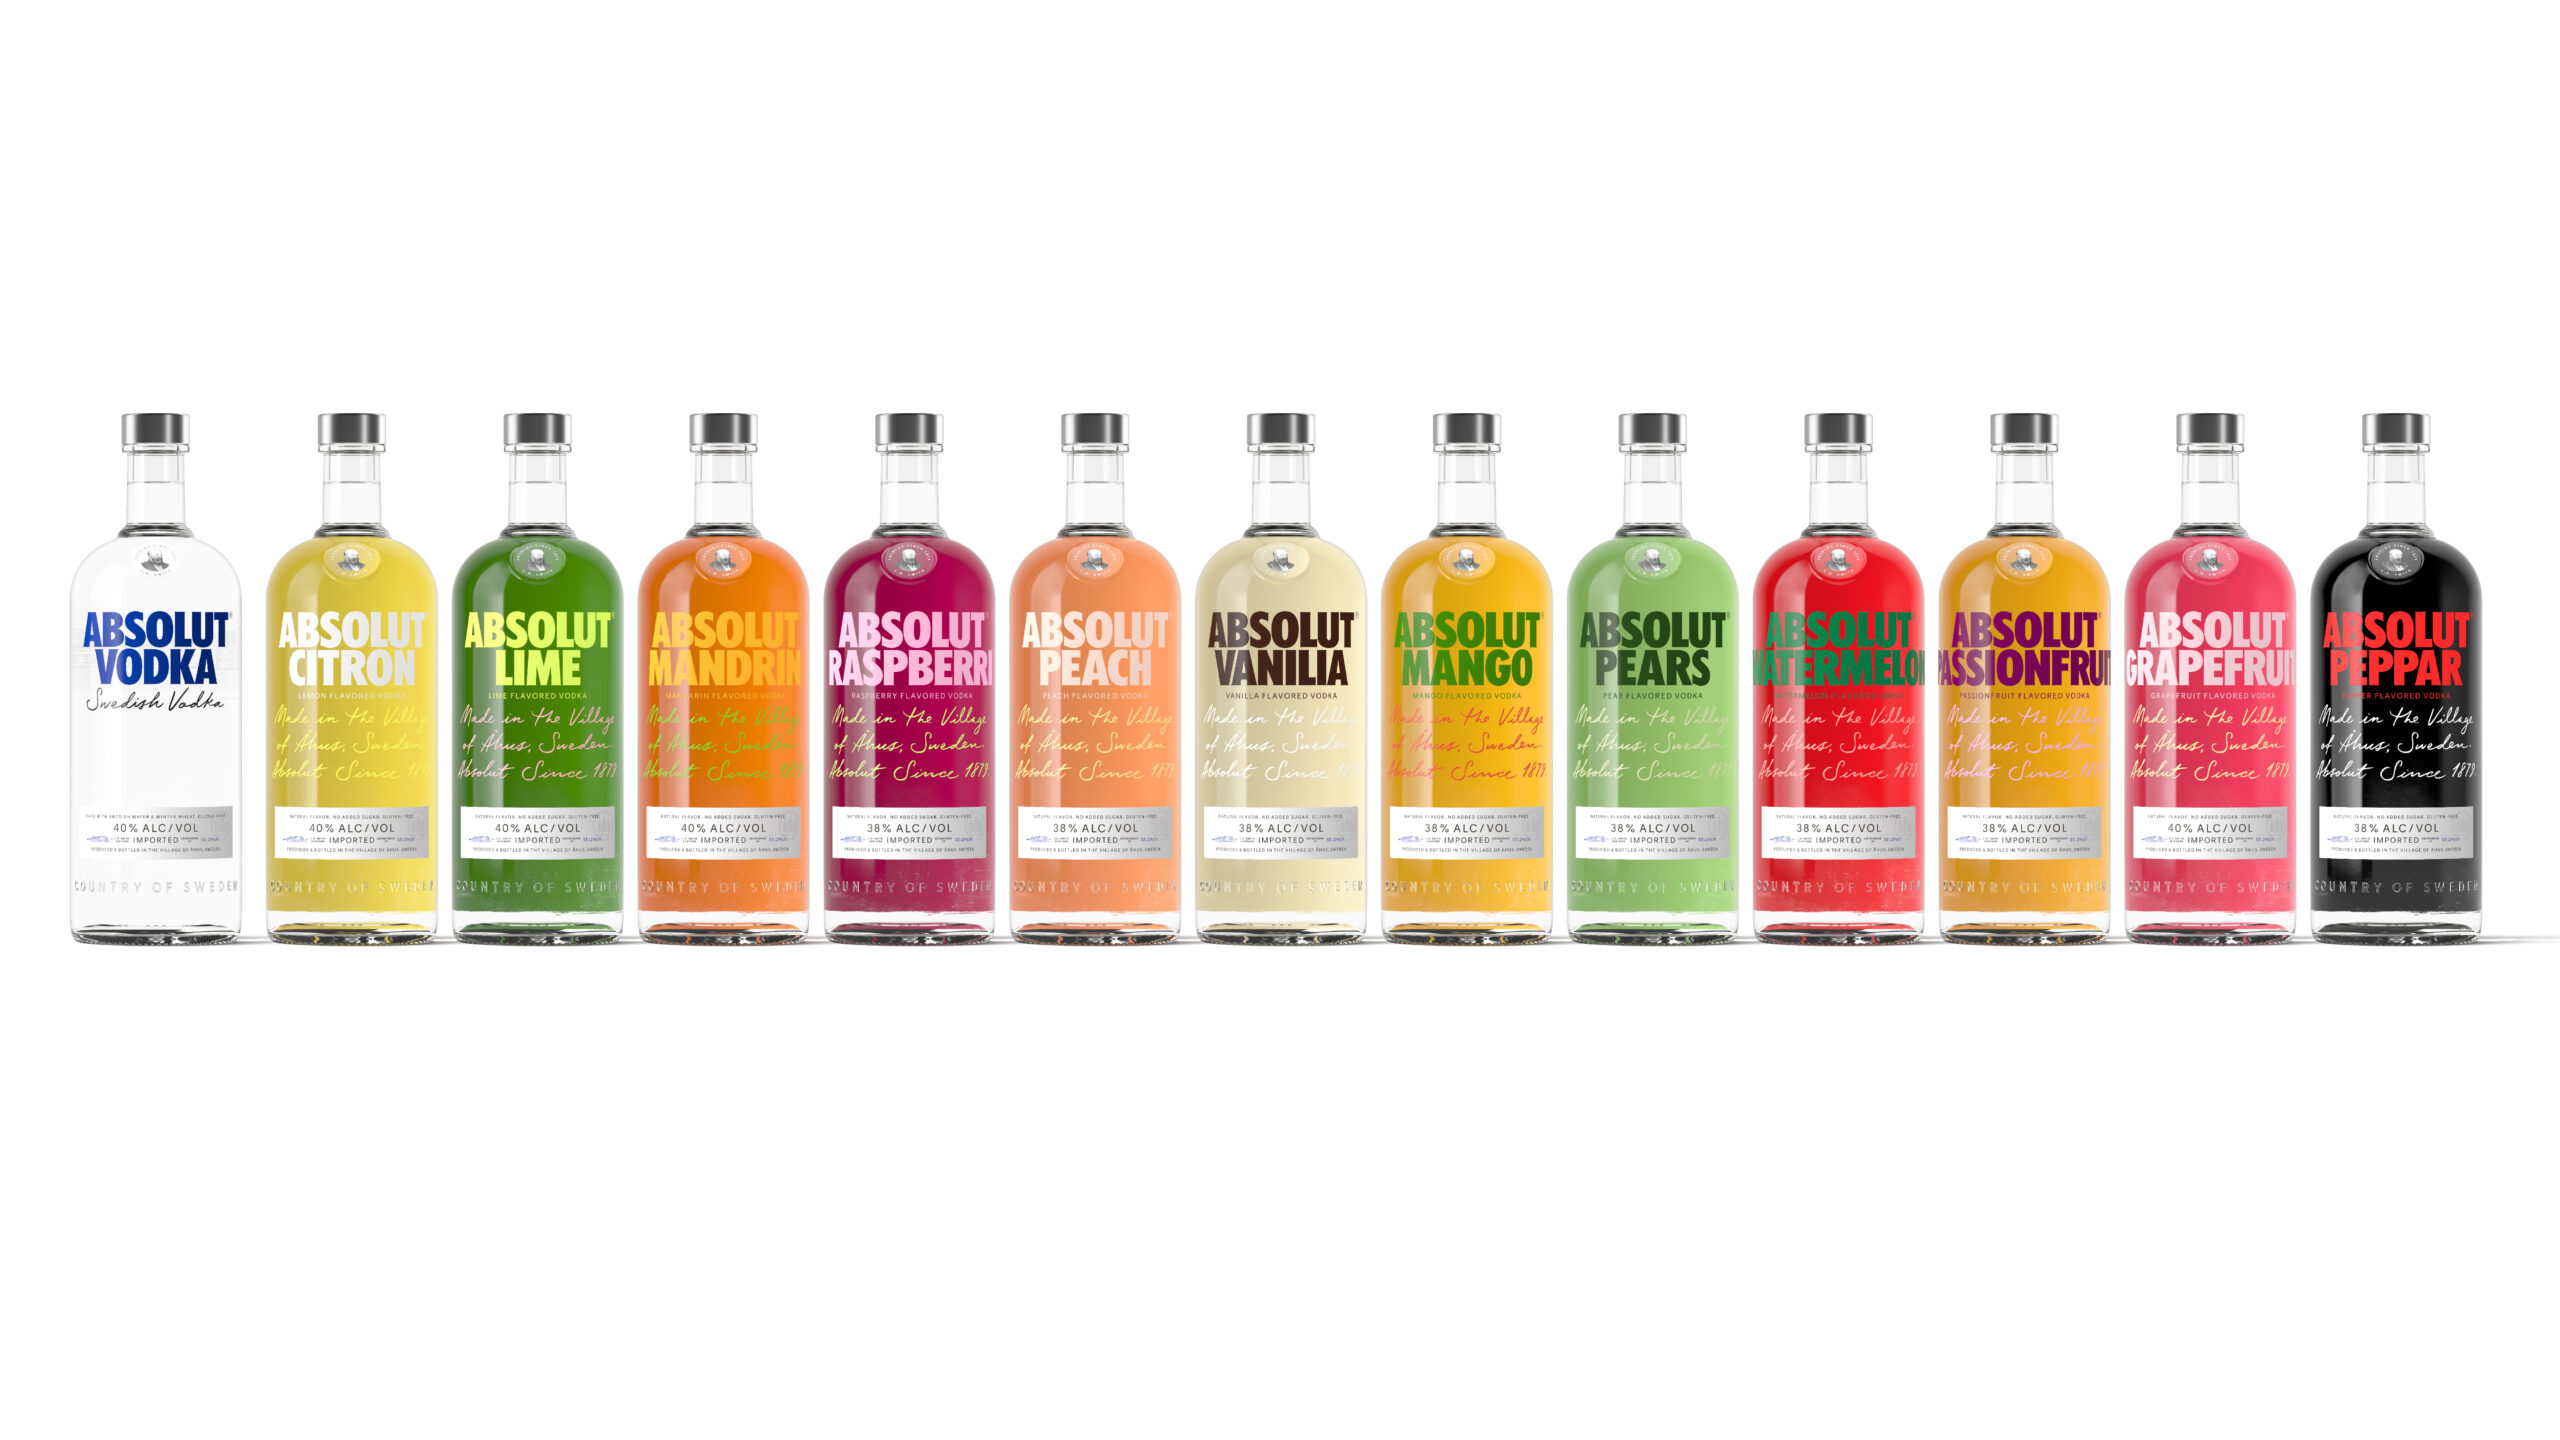 True to fruit flavors and new bottle design cater to evolving audience tastes